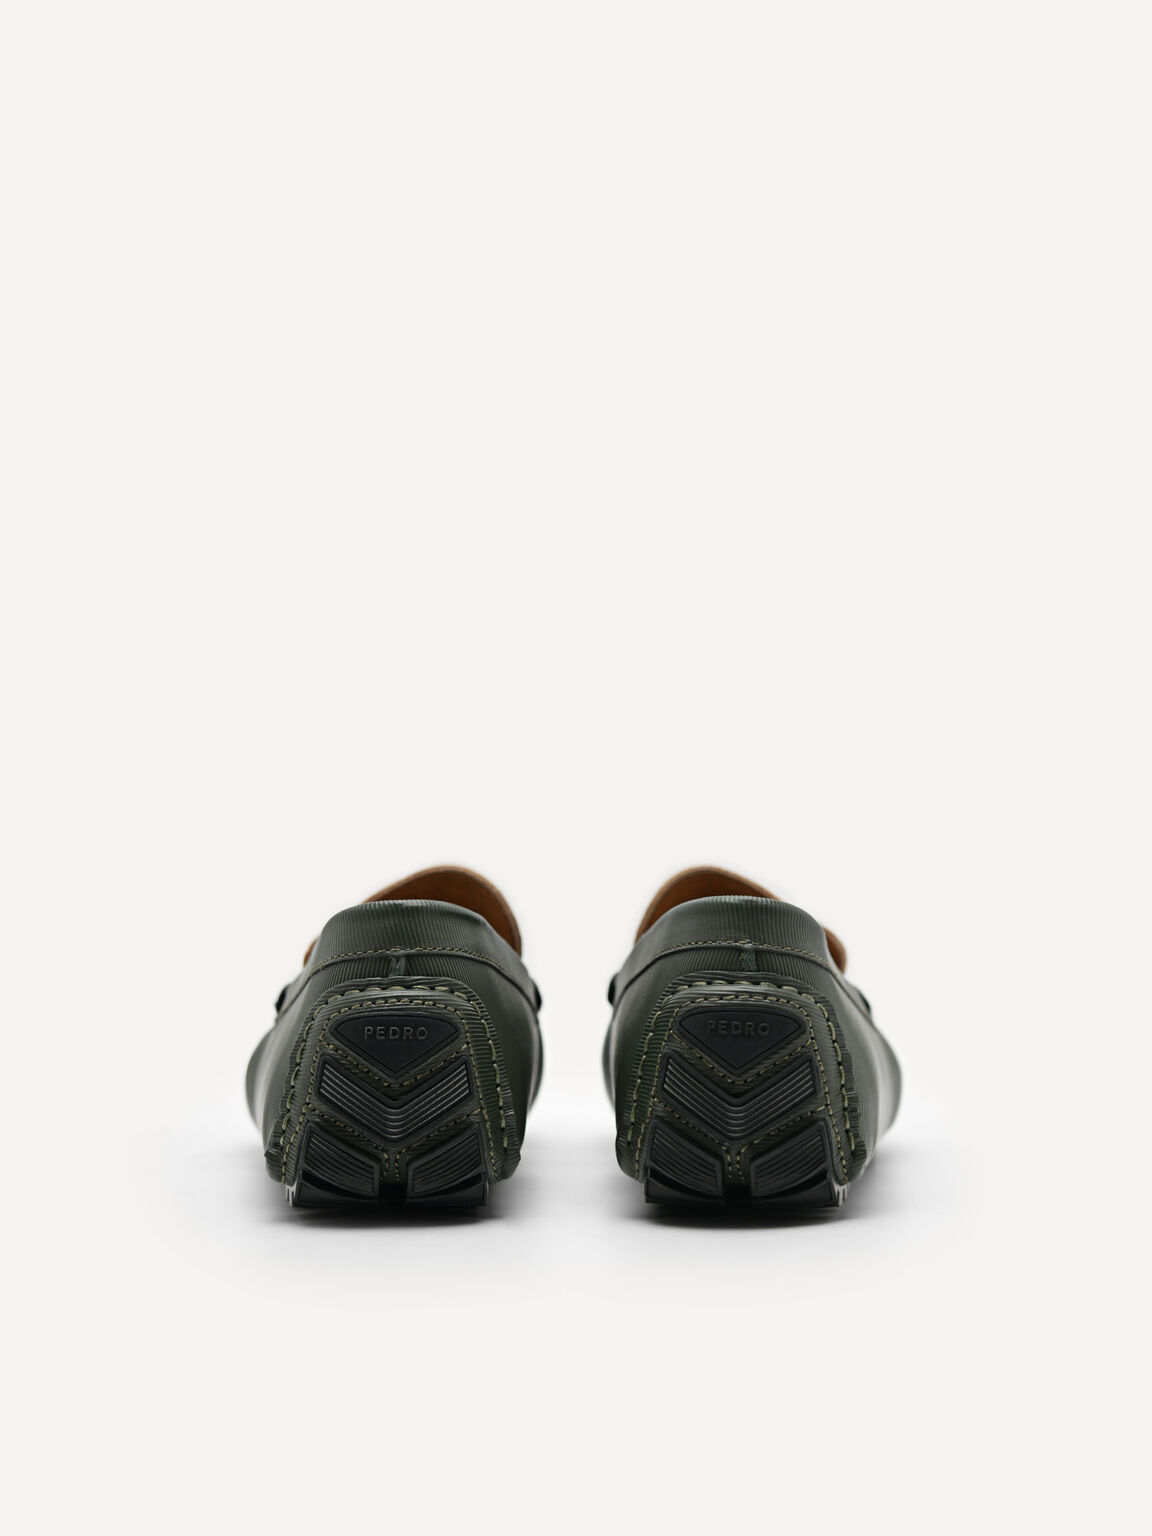 Spike Suede Leather Driving Shoes, Military Green, hi-res